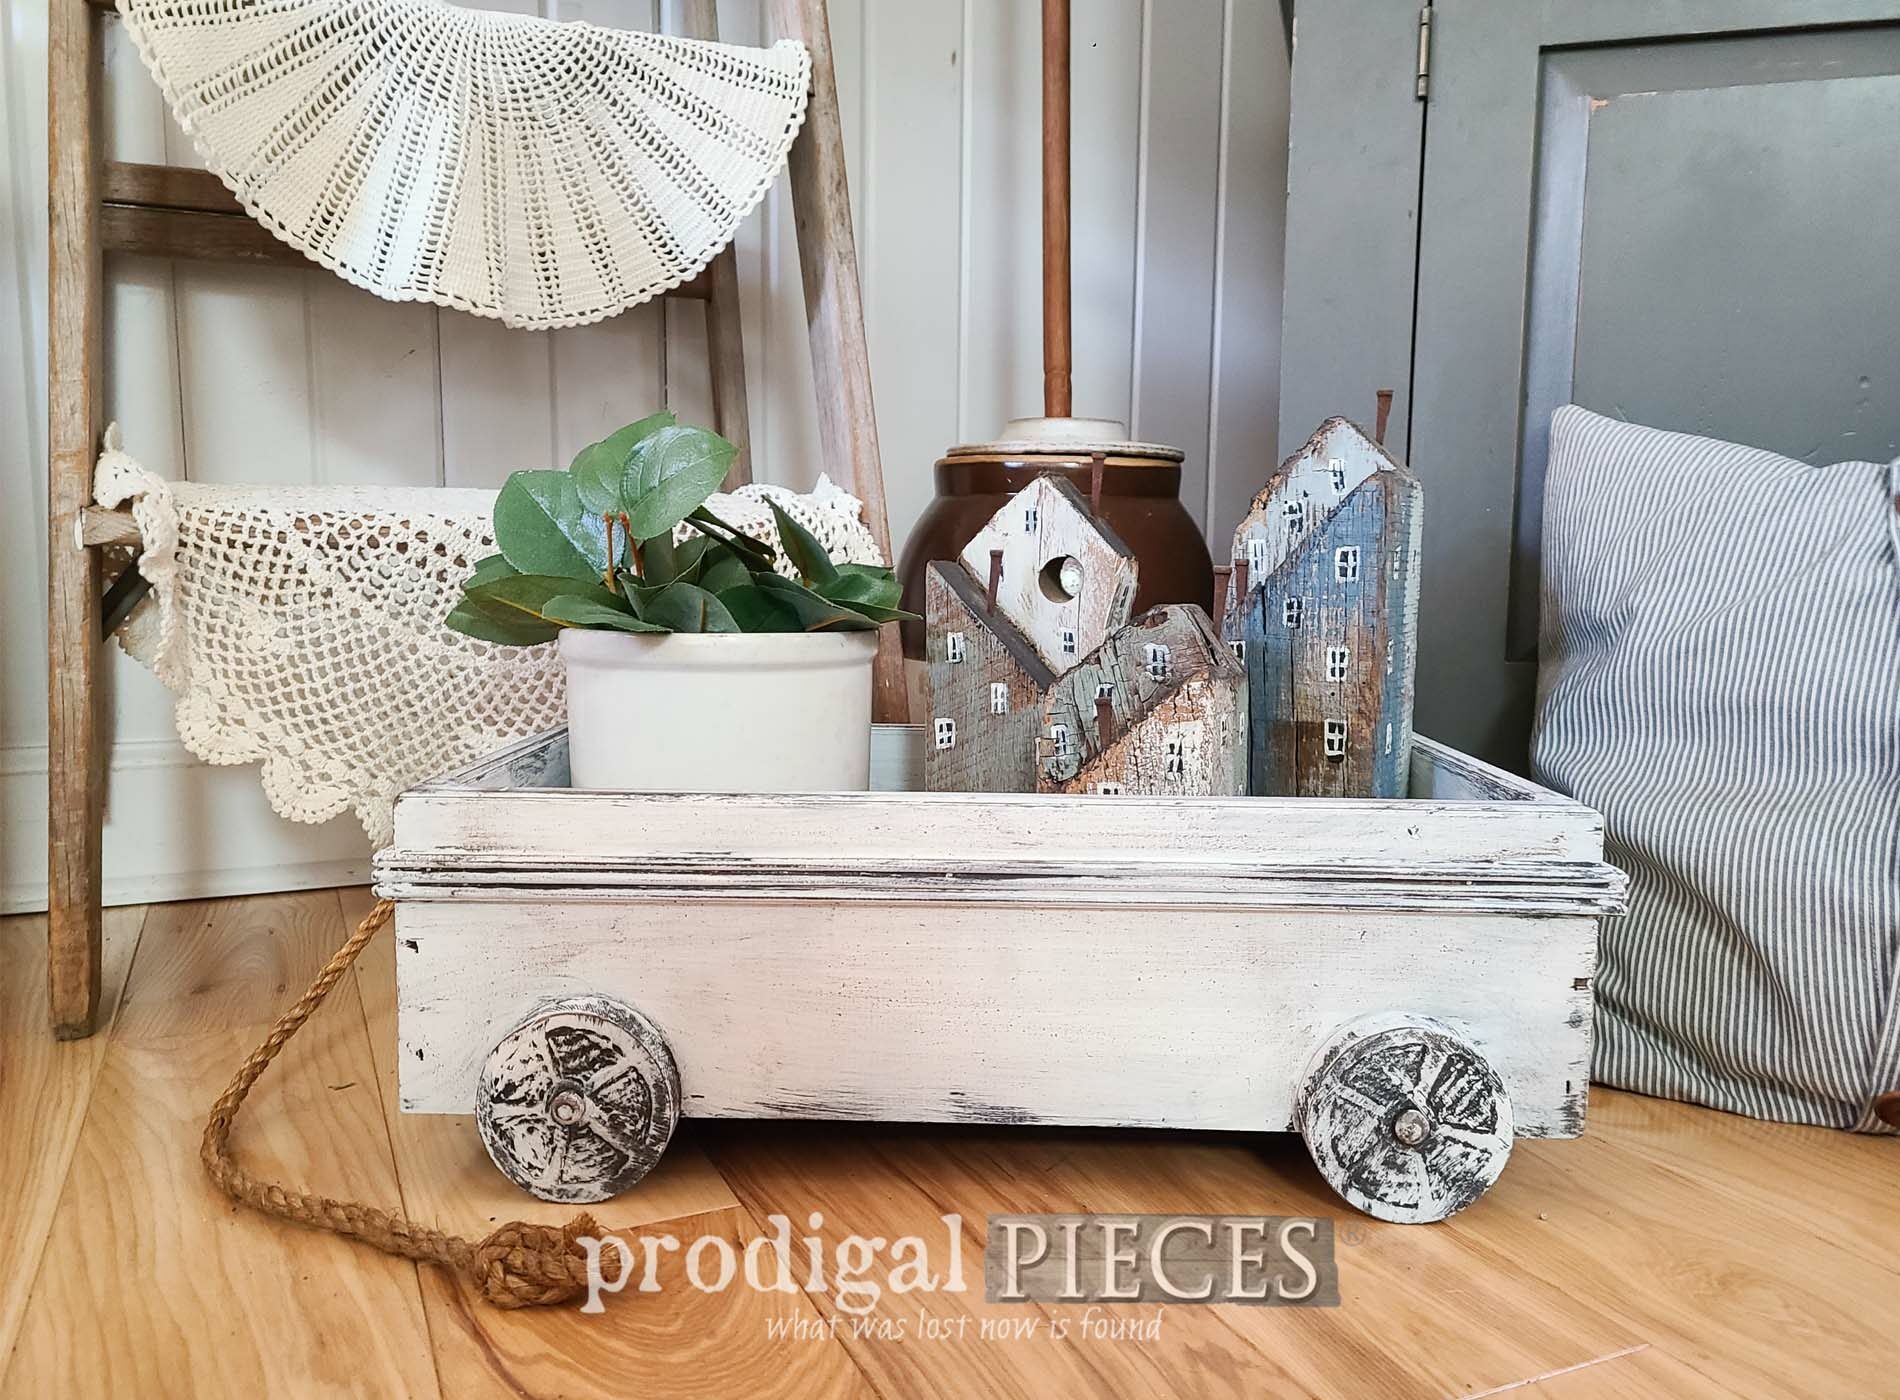 Featured Farmhouse Wooden Wagon Makeover From Beanie Baby Decor by Larissa of Prodigal Pieces | prodigalpieces.com #prodigalpieces #farmhouse #diy #budgetdecor